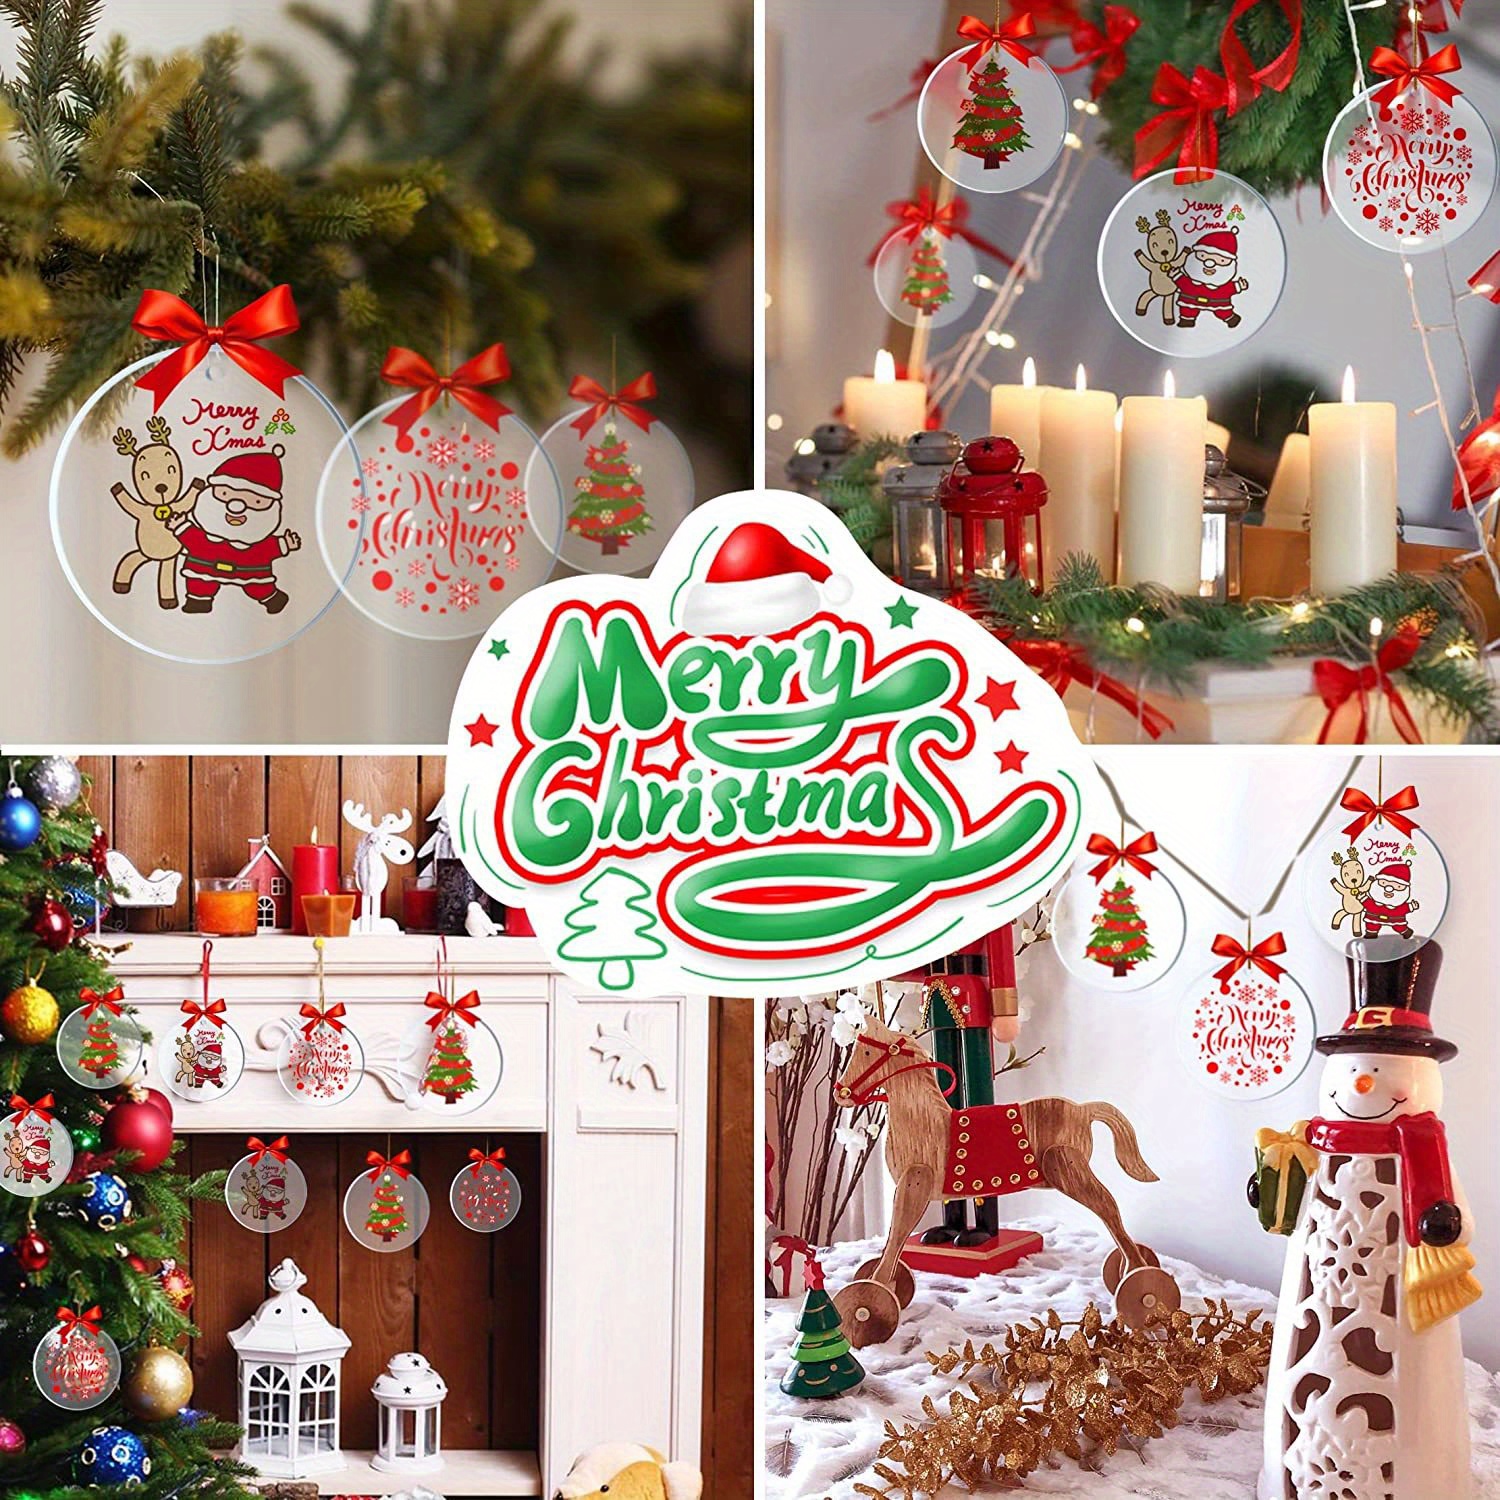 30 Pcs 3.15 Inch Acrylic Sublimation Ornament Blanks with Holes, Round  Acrylic Christmas Ornaments for DIY Painting, Hanging Ornaments for  Christmas